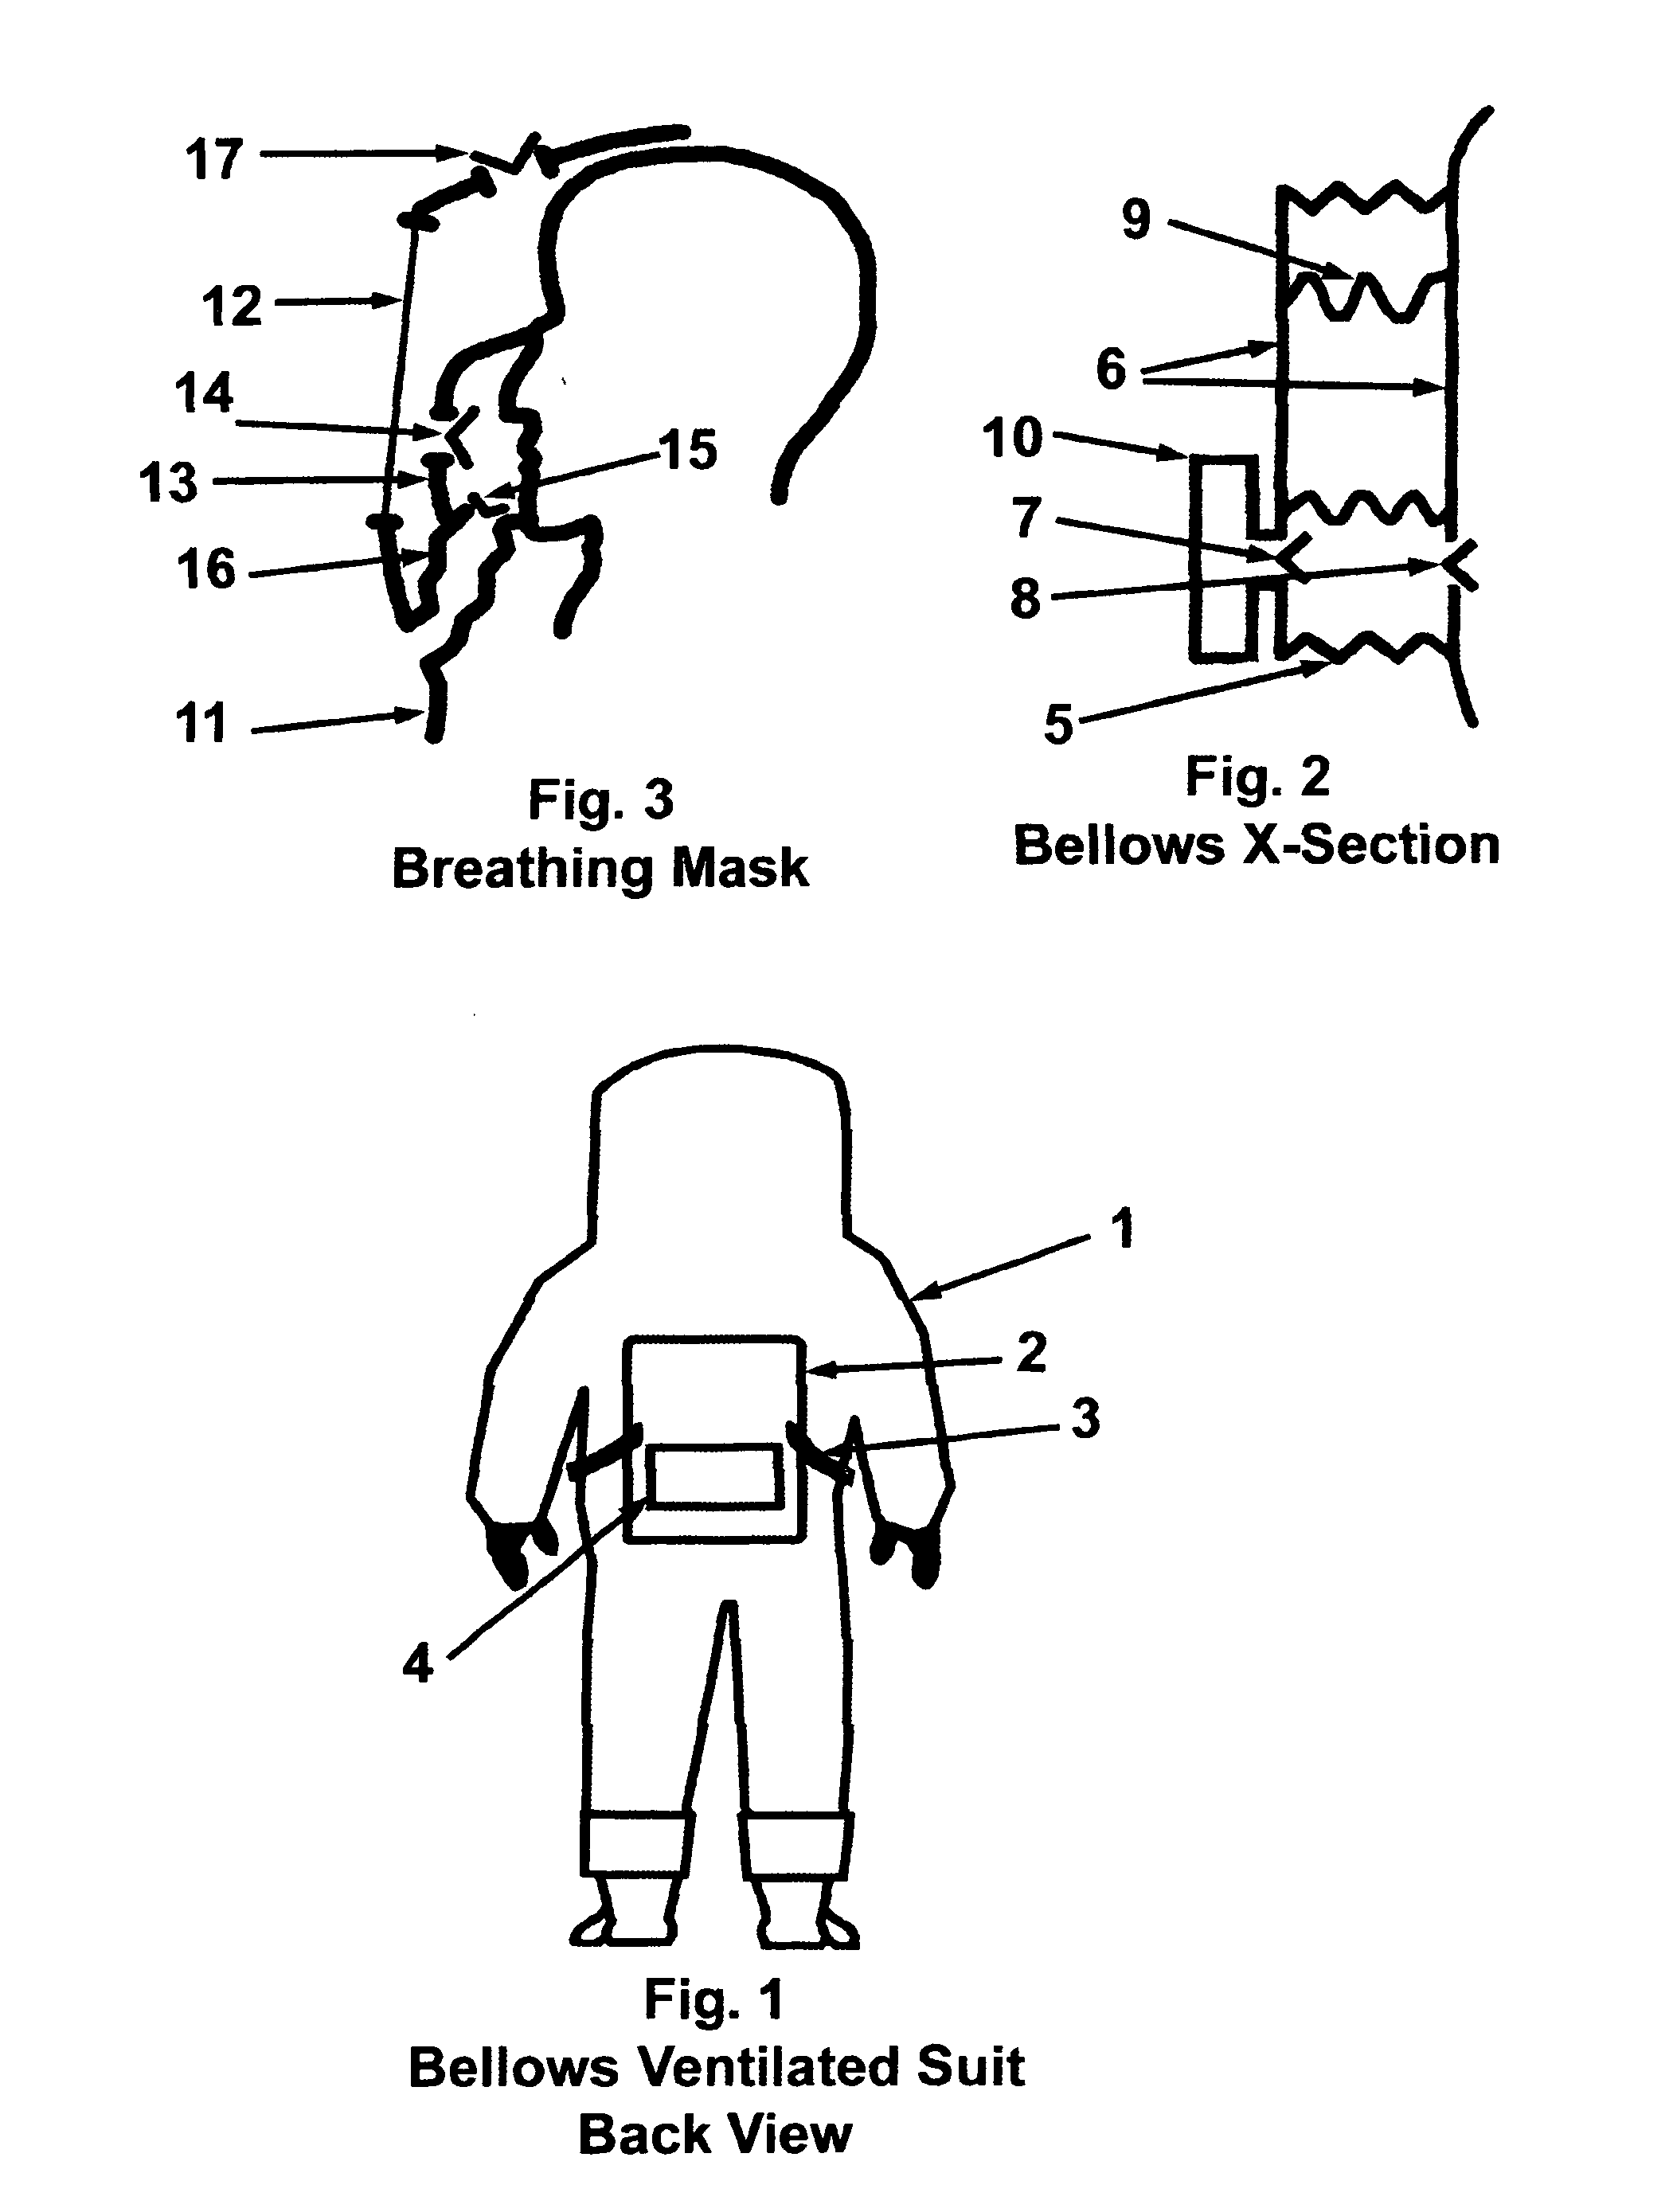 Protective suit ventilated by self-powered bellows